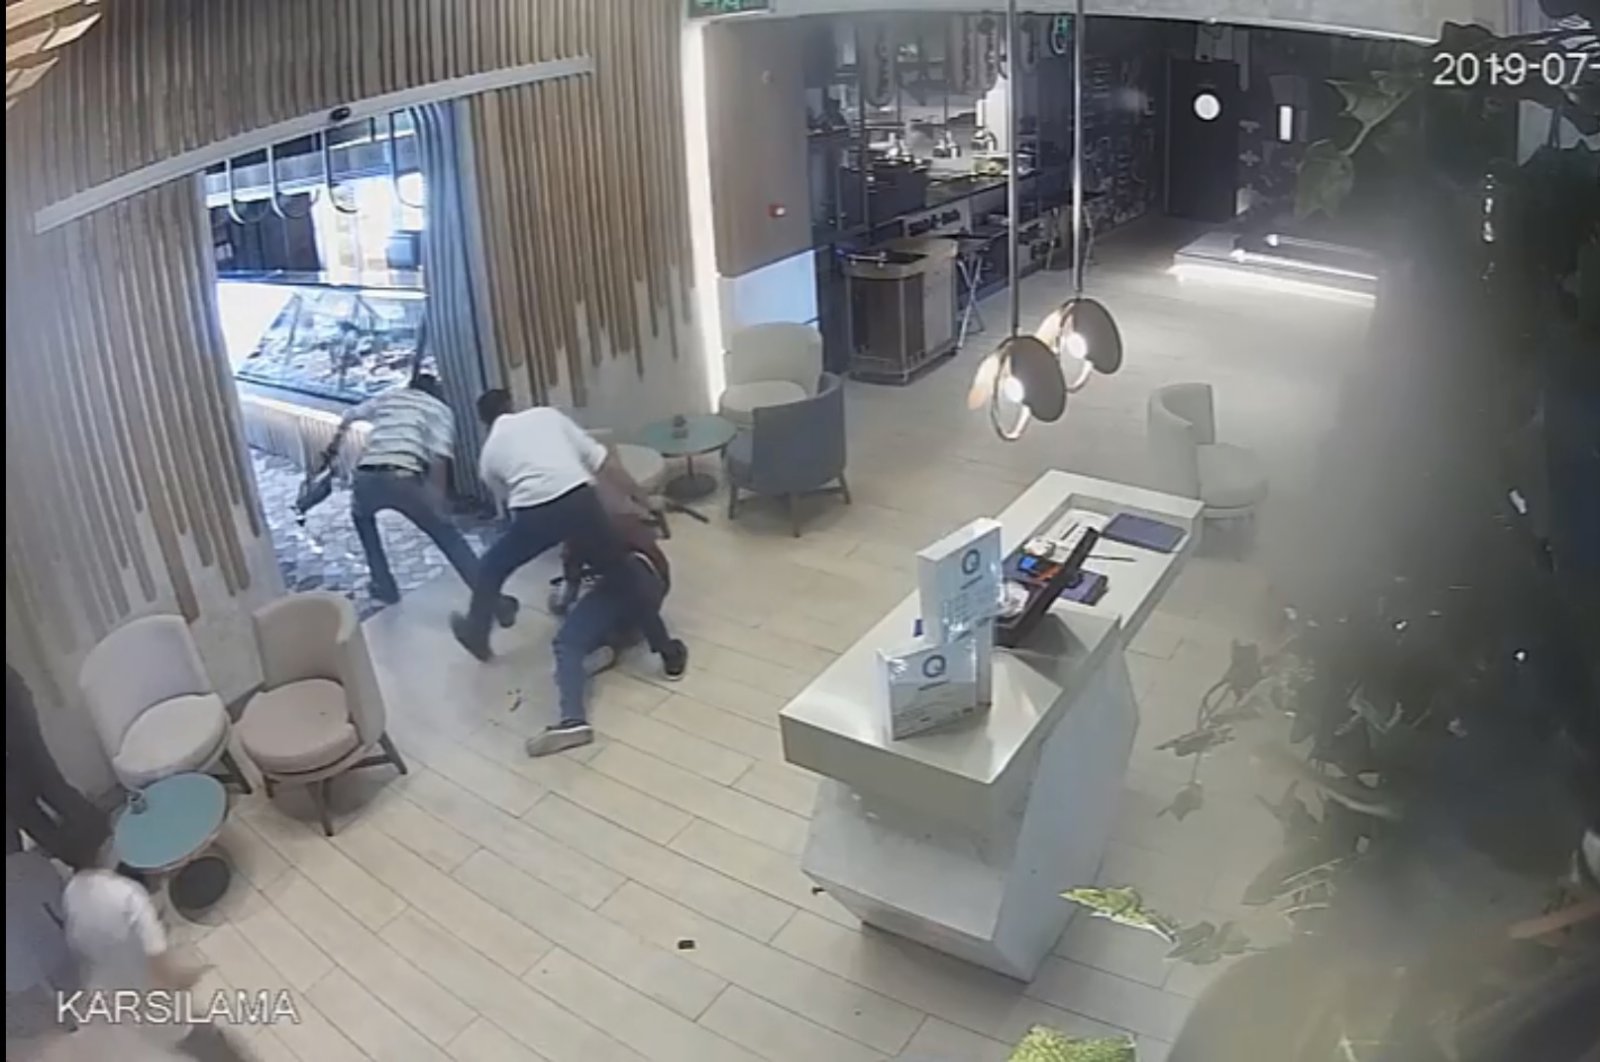 Camera footage shows the moment of the 2019 attack on Turkish diplomat Osman Köse by PKK terrorists in a restaurant in Irbil, Iraq. (DHA Photo)